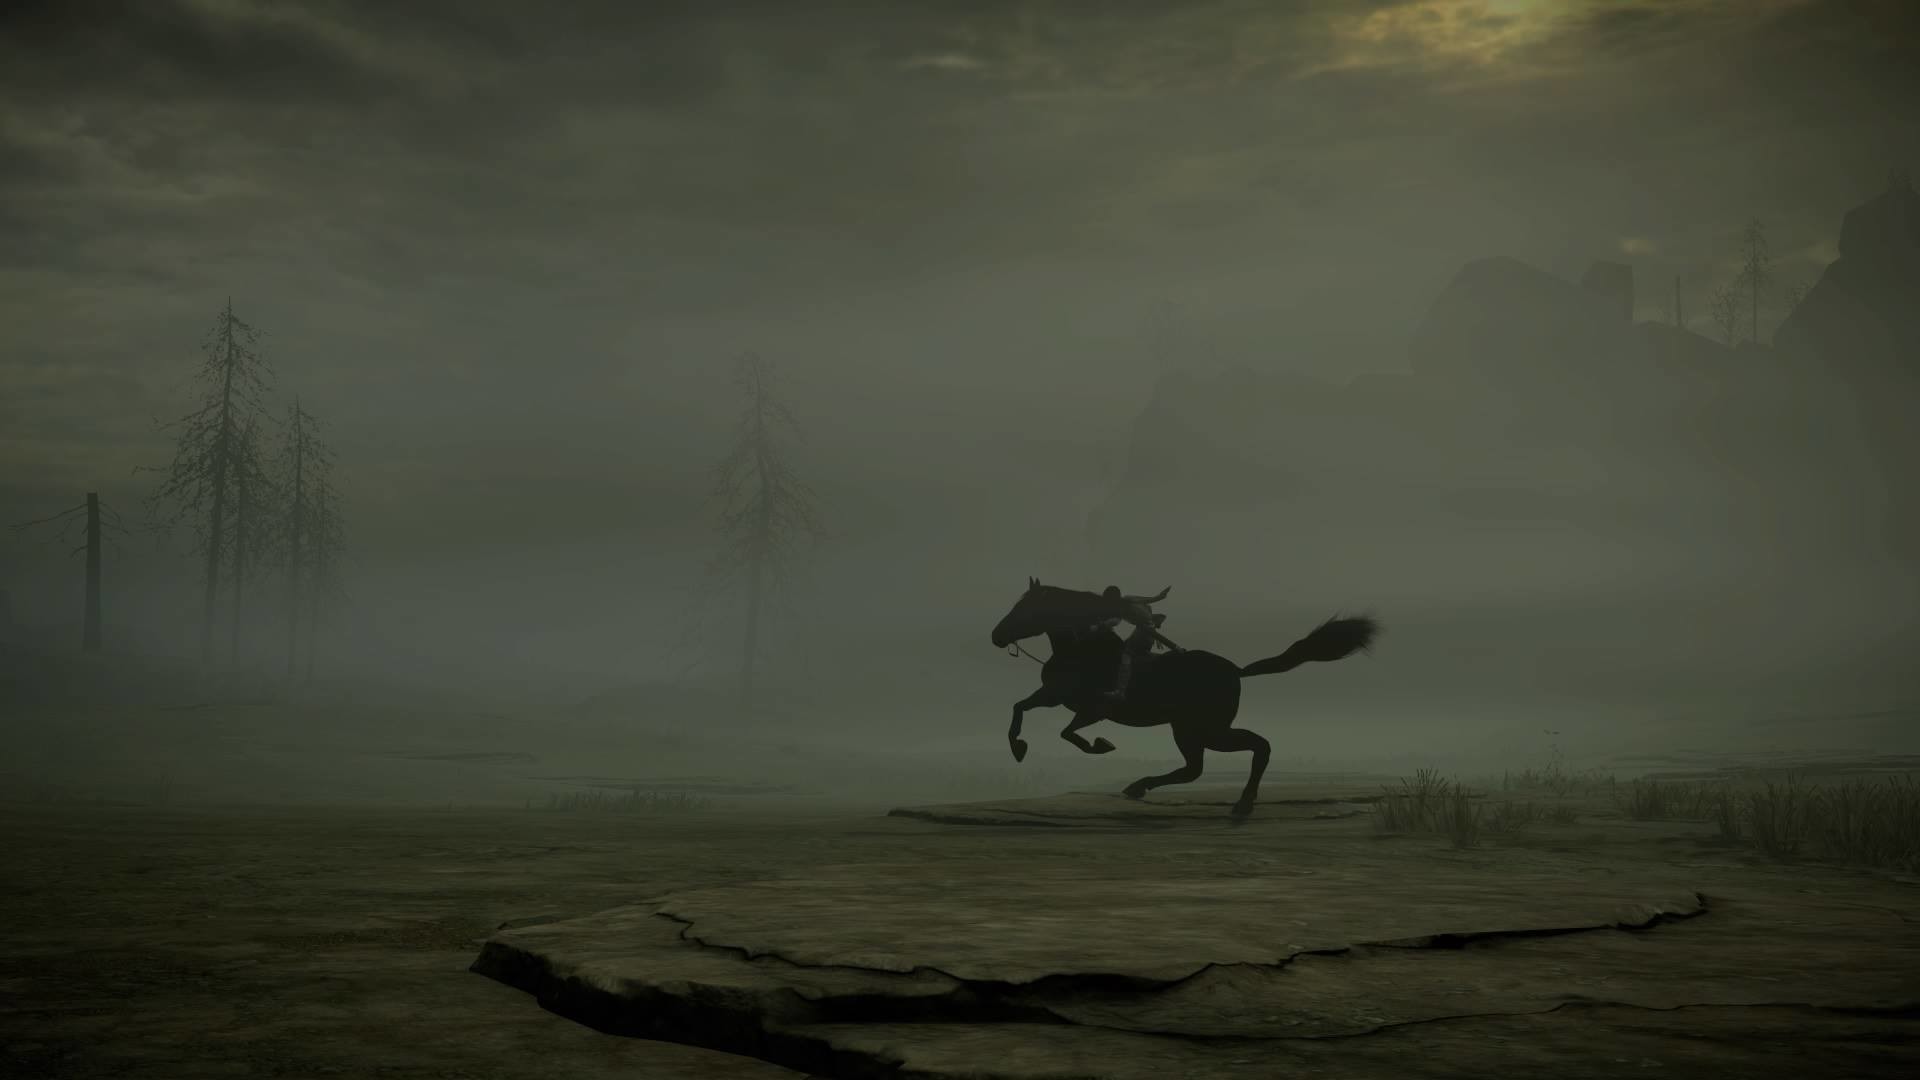 ArtStation - Shadow of the Colossus PS4 - Screenshots - first time playing